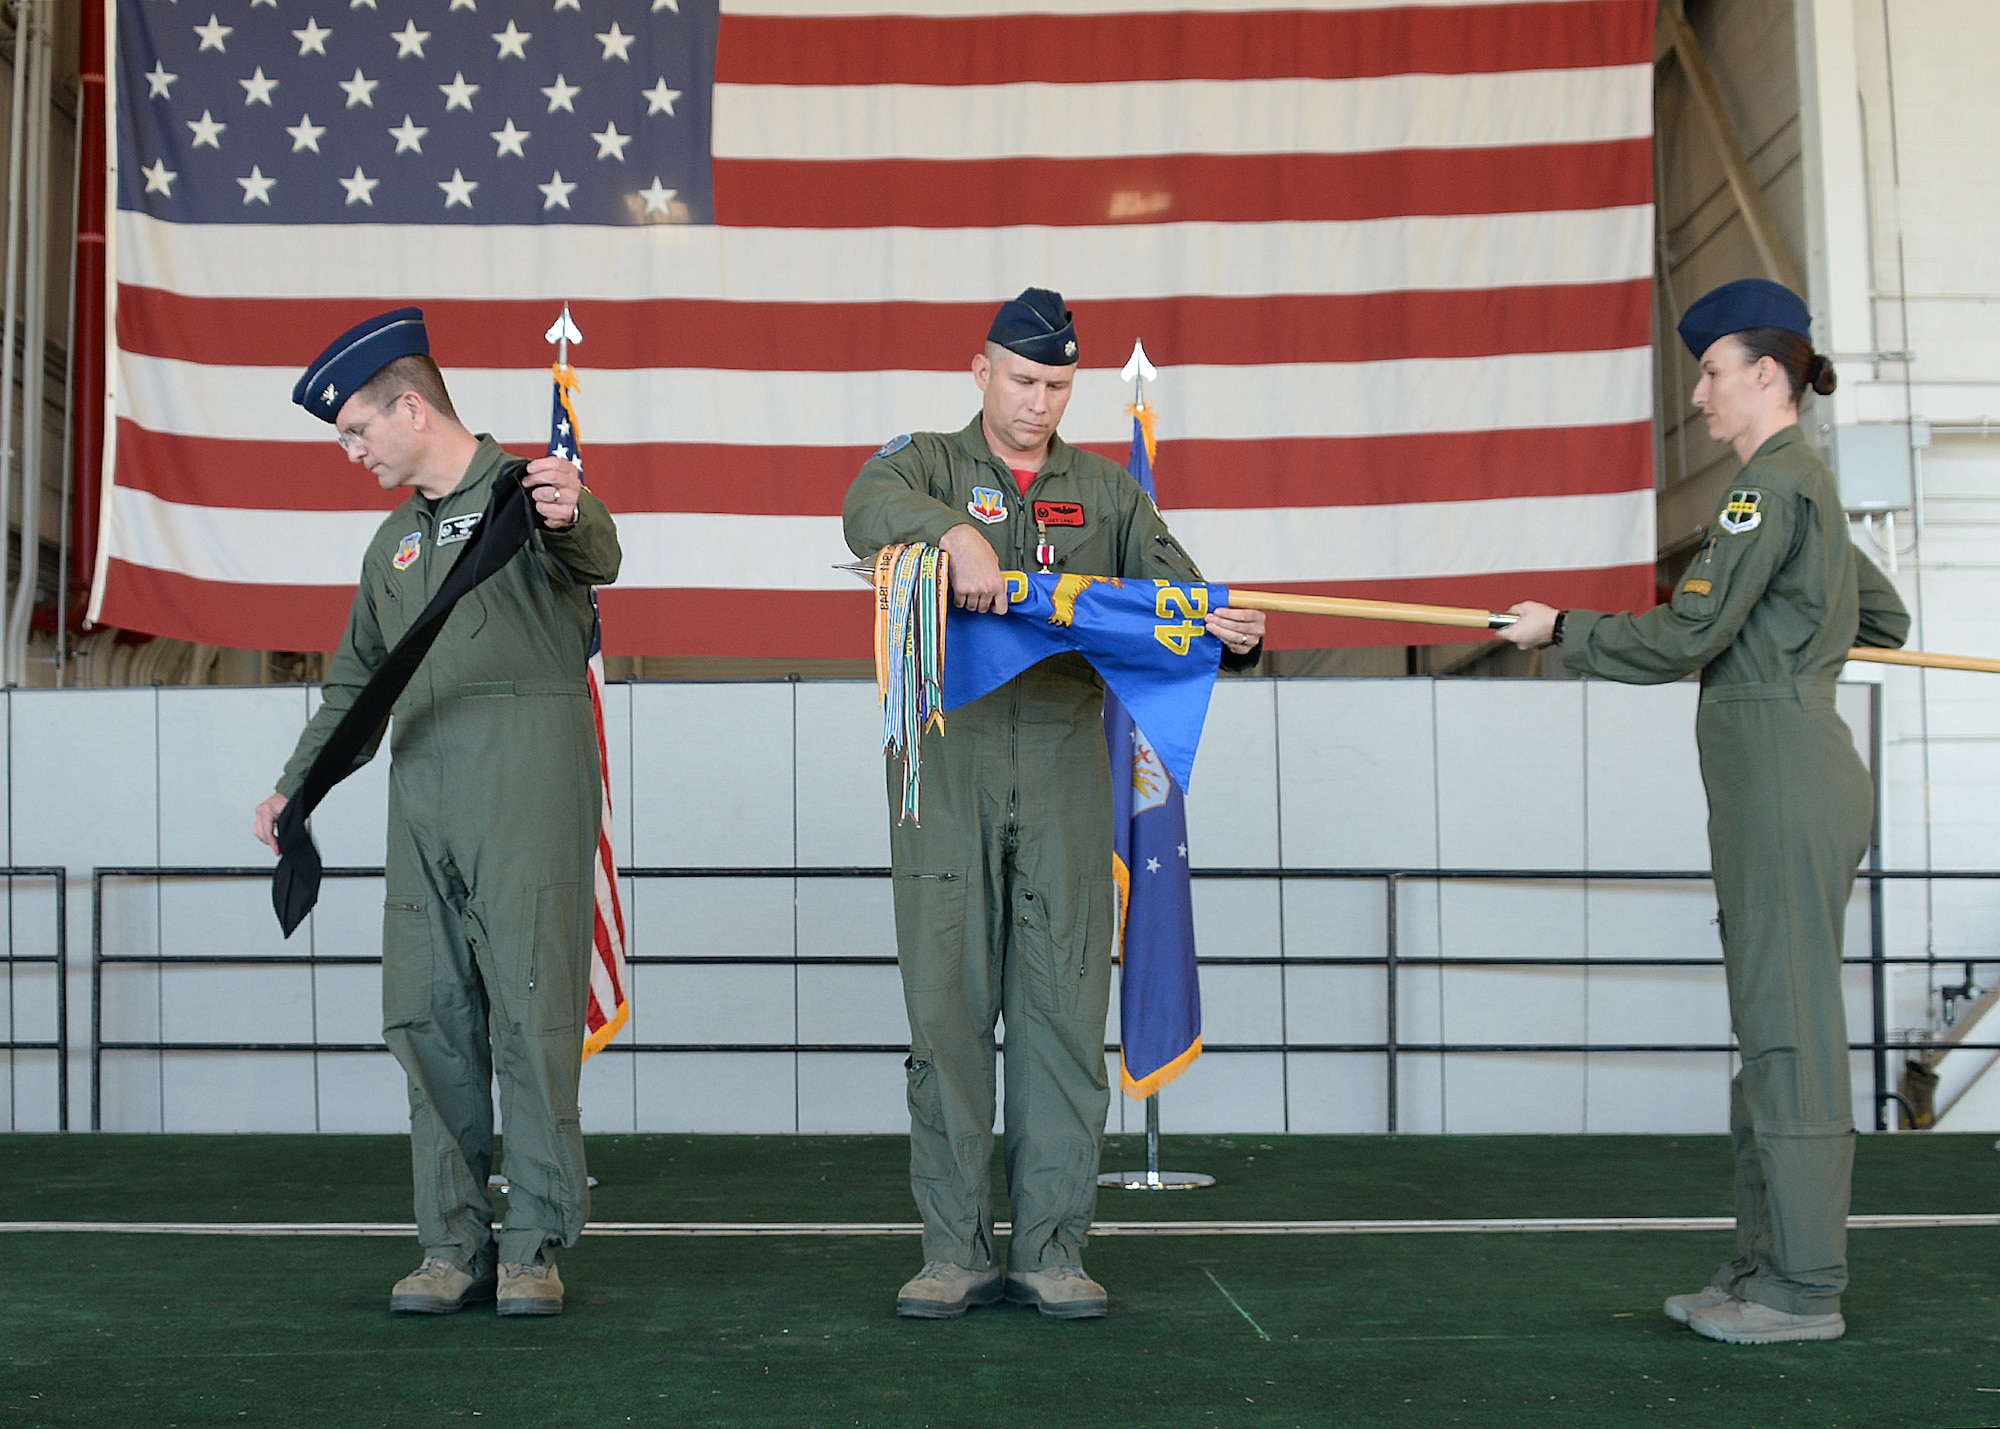 Col. Darren B. Halford, 9th Operations Group commander and Lt. Col. Joseph Laws, 427th Reconnaissance Squadron commander, prepare to case the unit flag during an inactivation ceremony Nov. 20, 2015, at Beale Air Force Base, California.  MC-12W Liberty Airmen from the past and present attended the ceremony and reception to reminisce about their time supporting the MC-12 mission. Since May 2012, the 427th RS has deployed and trained 455 Airmen, flown 4,770 combat missions, eliminated 503 enemy combatants, and saved countless coalition lives. (U.S. Air Force photo by Robert Scott)